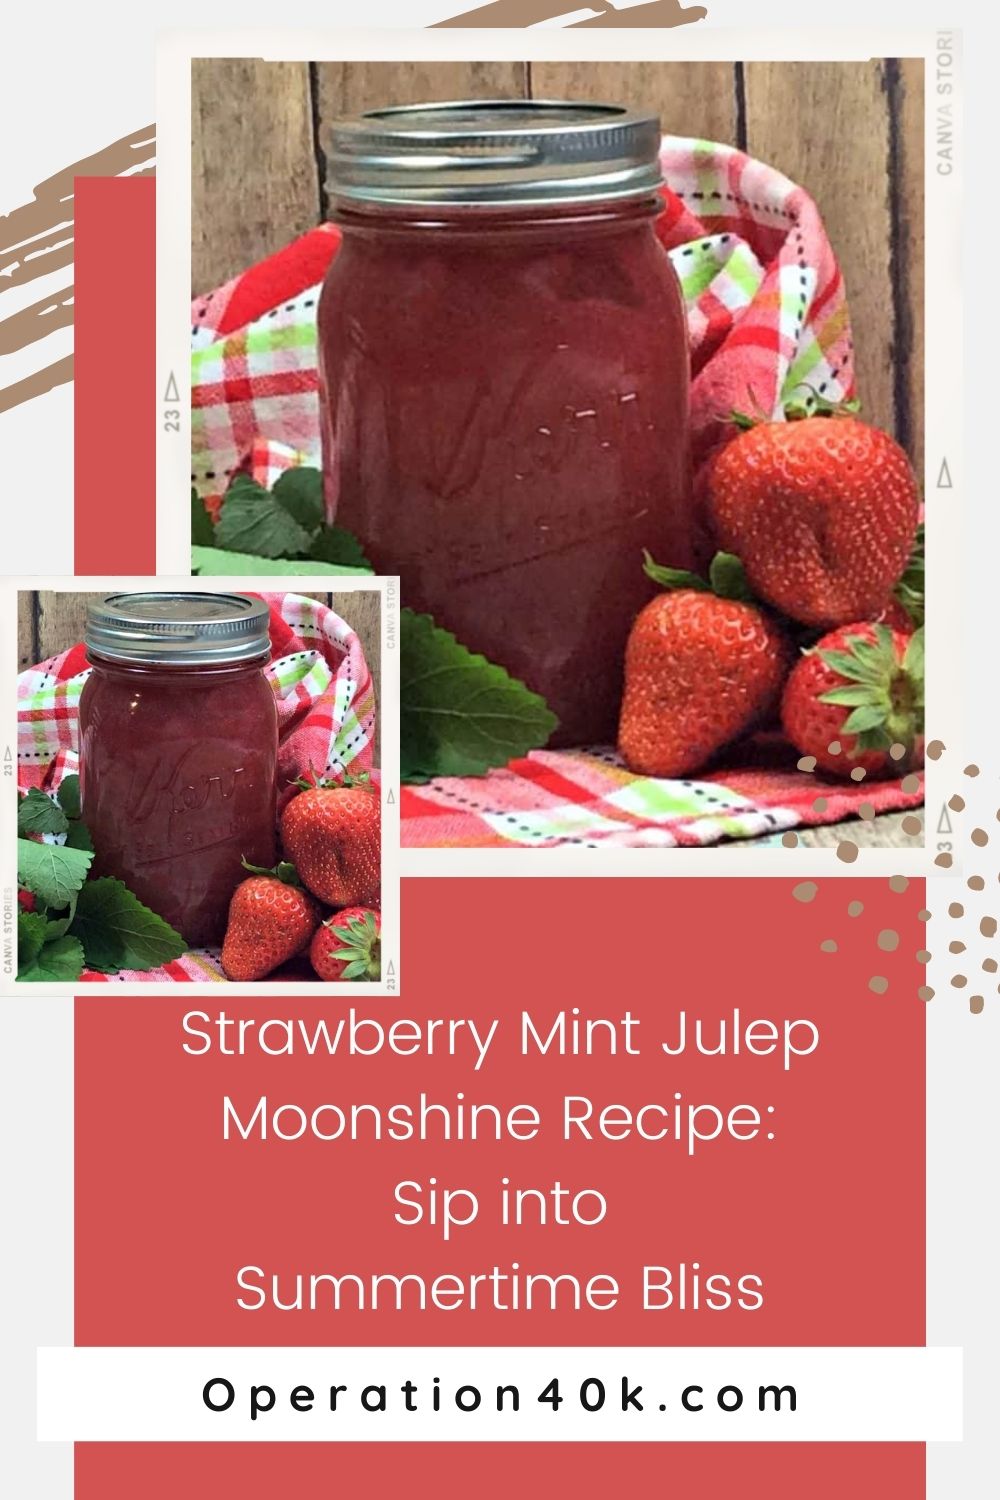 Strawberry Mint Julep Moonshine Recipe: Sip into Summertime Bliss